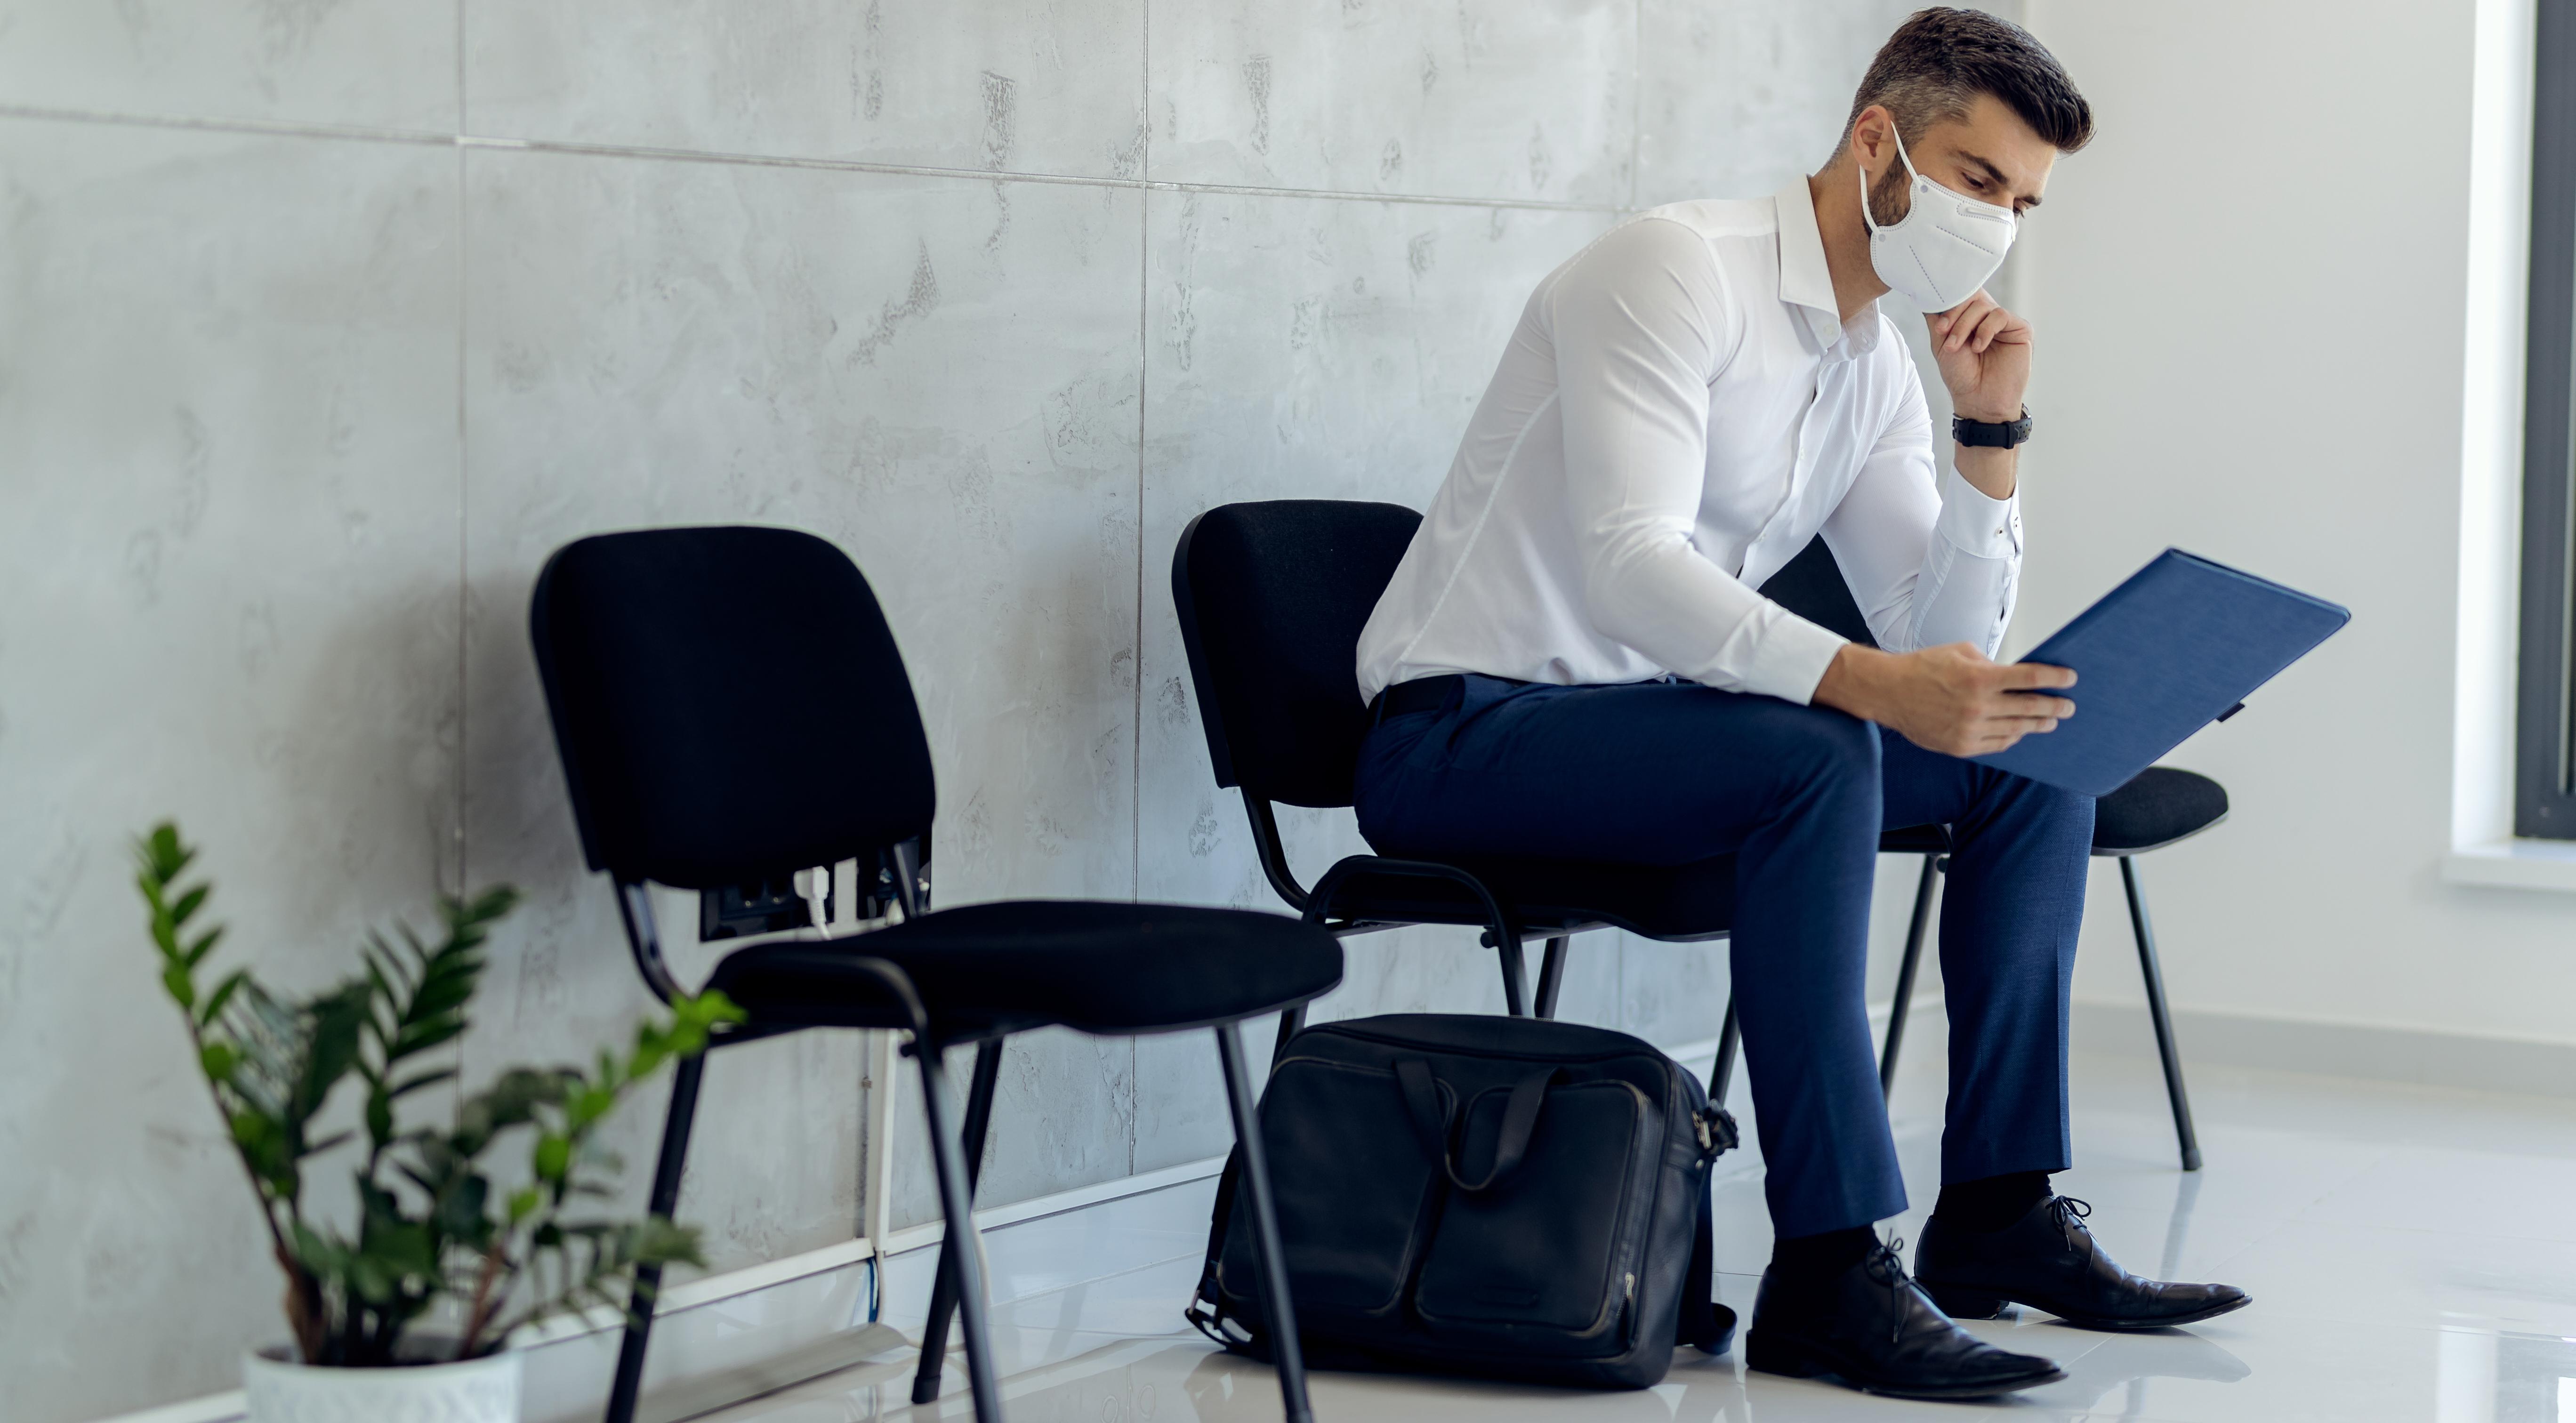 Businessman wearing protective face mask while waiting or job interview.